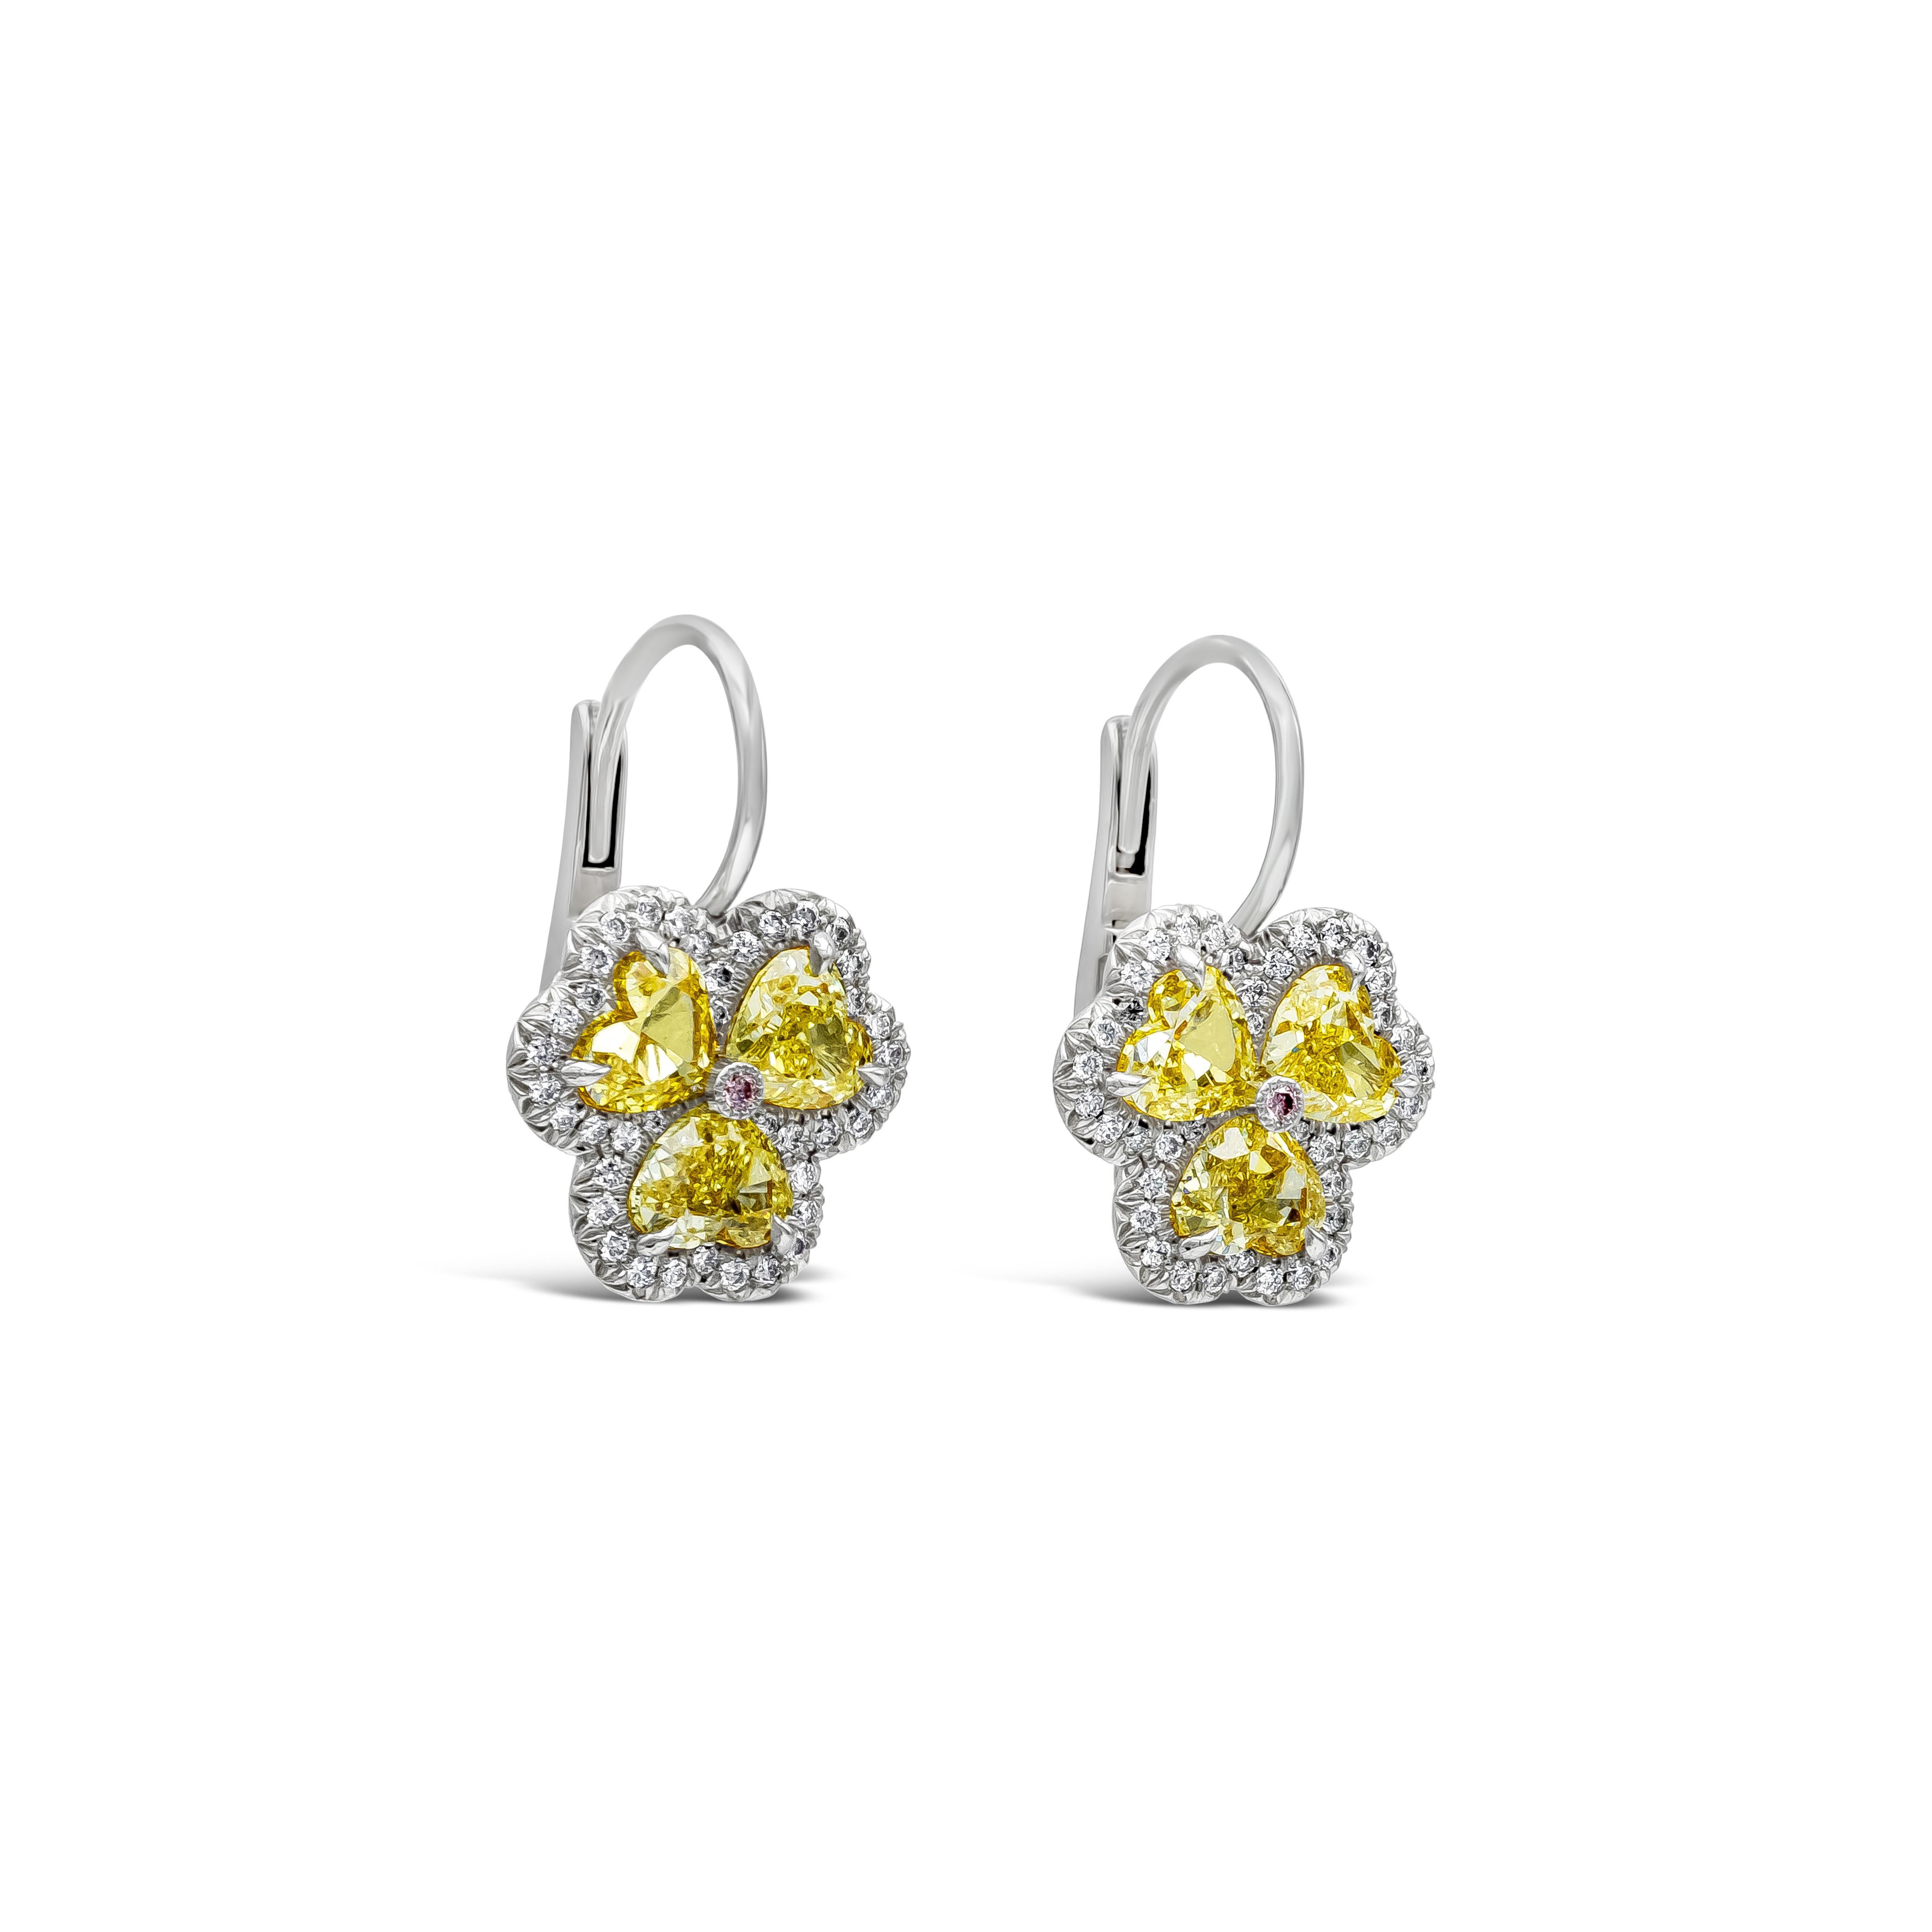 A simple yet beautiful fashion drop earrings showcasing 3 on each earring fancy intense yellow color heart shape cut diamonds weighs 3.20carats total, set in a clover designed setting. Each heart shape cut diamonds is accented by a single row of